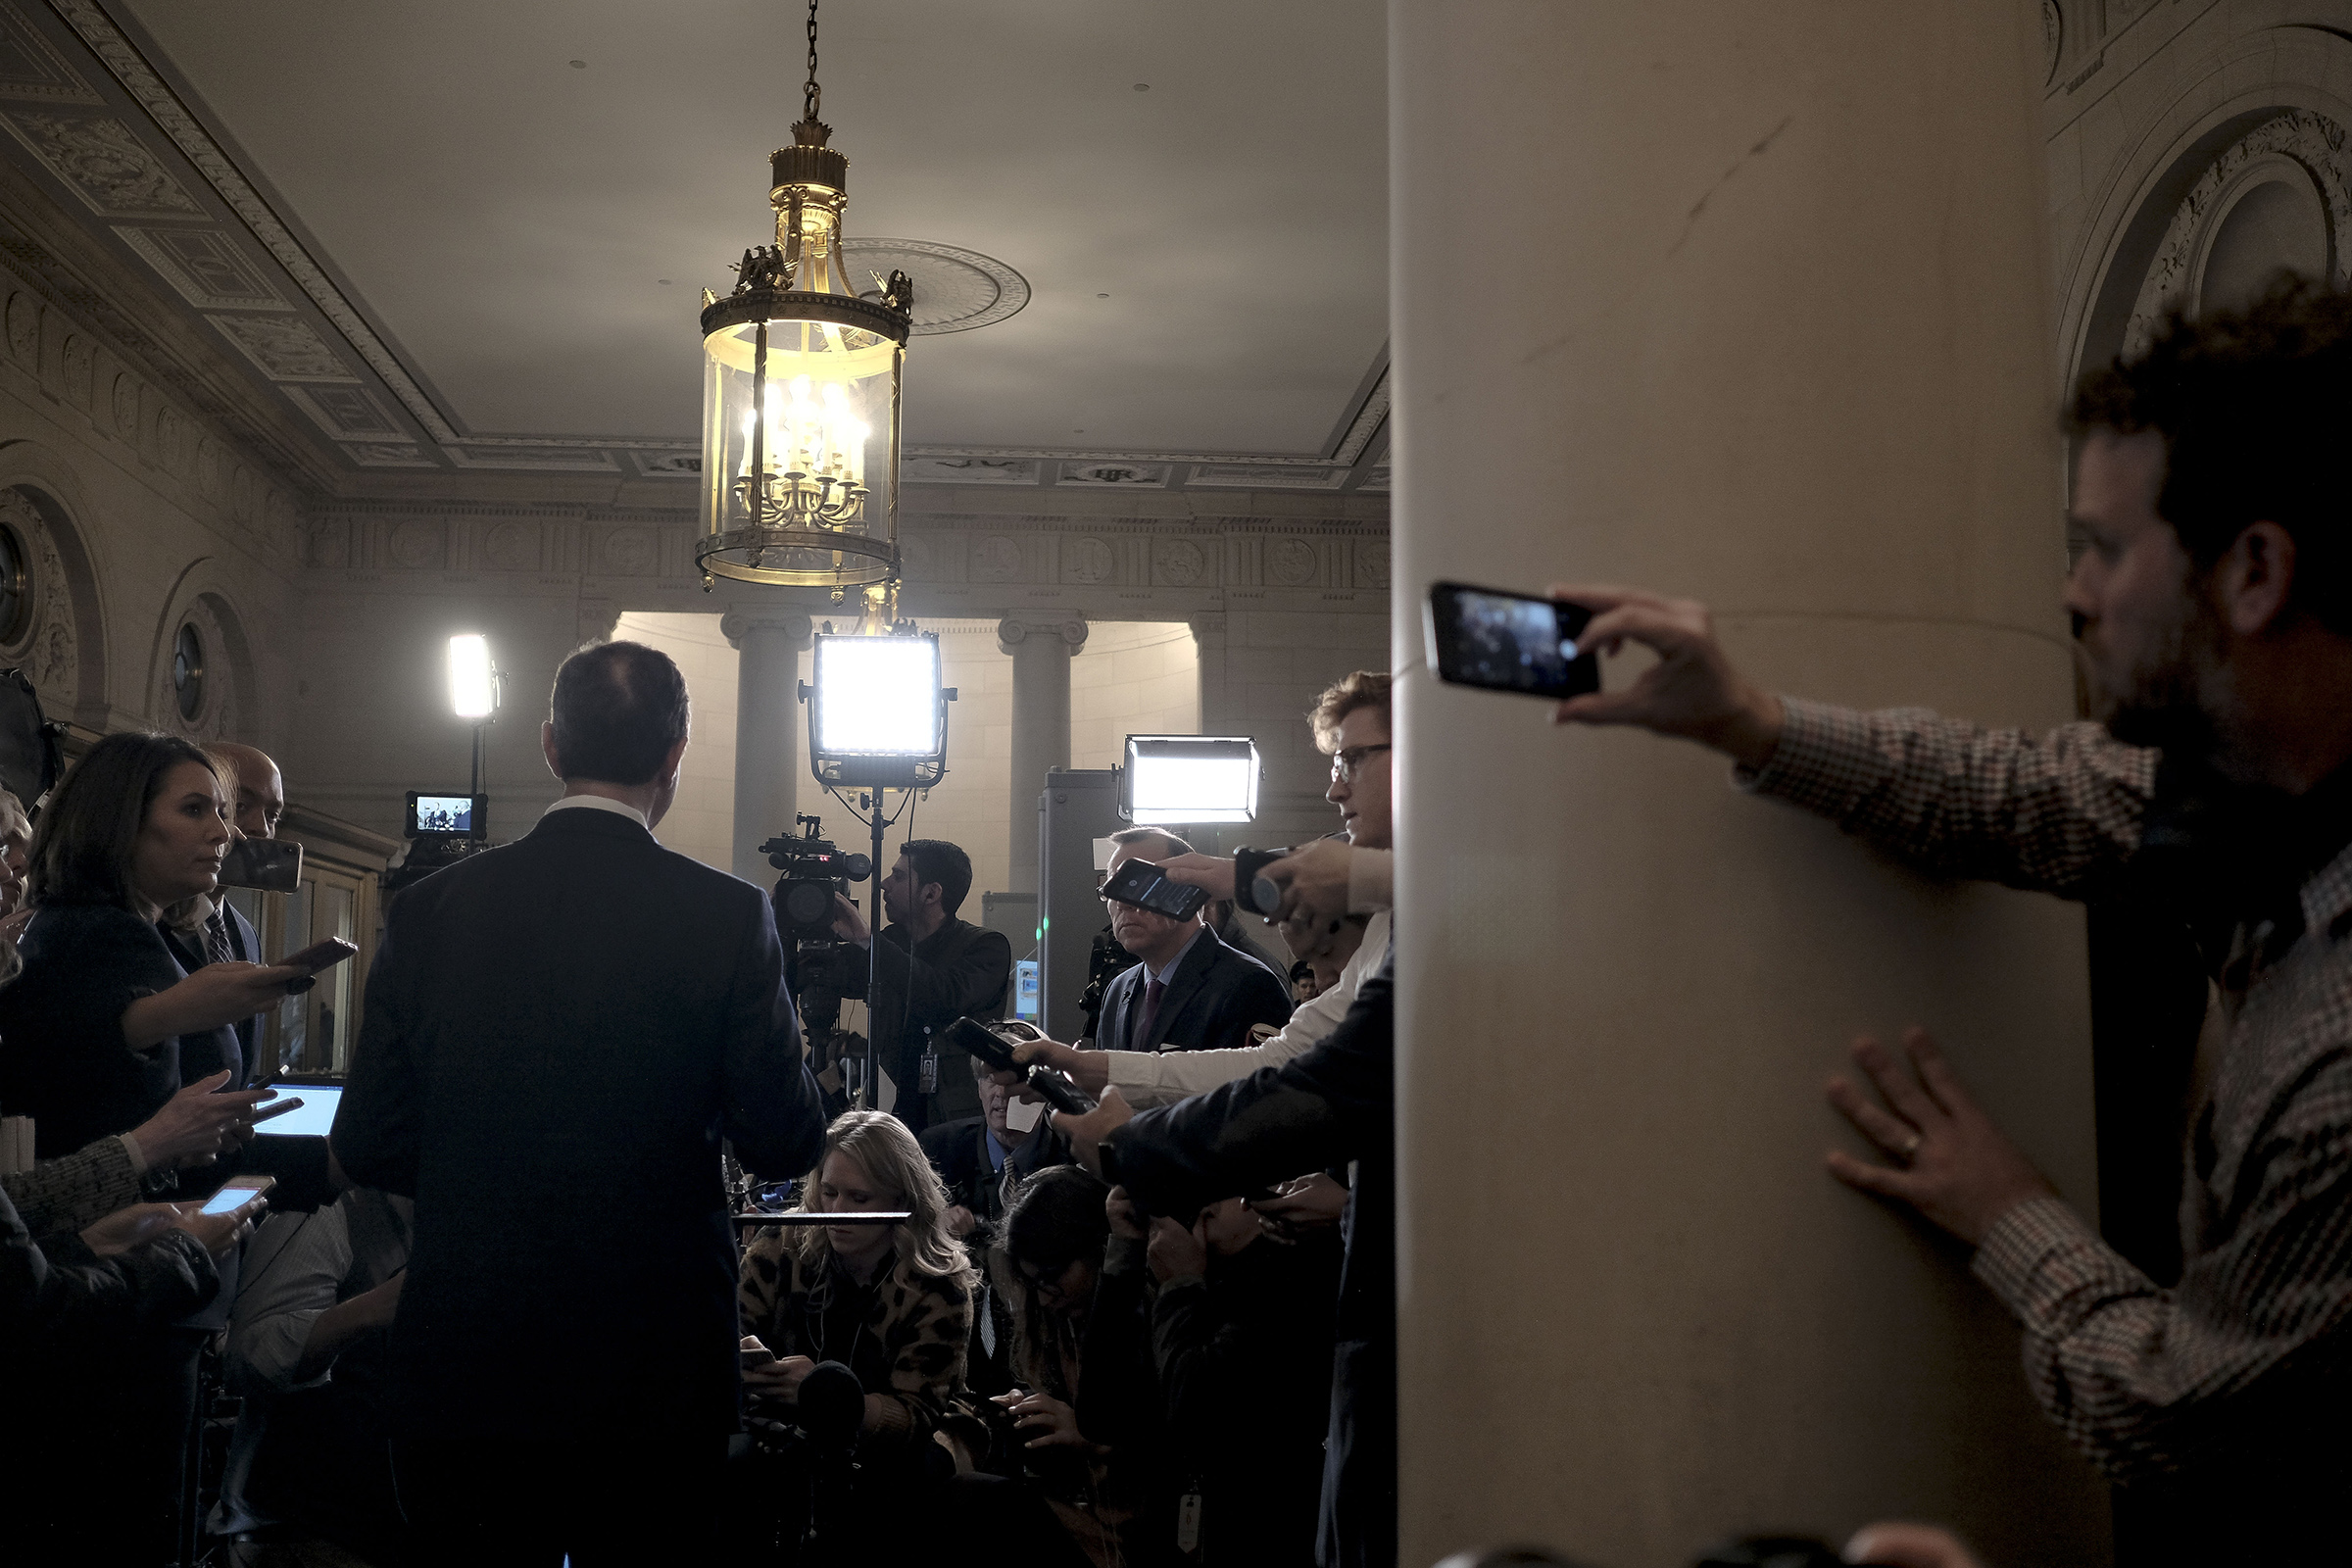 11/20/19, Capitol Hill, Washington, D.C. Chairman Adam Schiff (D-Calif.) speaks with the press during a break from the House Intelligence Committee hearing on the impeachment inquiry with Ambassador Gordon Sondland at the Longworth House Office building on Capitol Hill in Washington, D.C. on Nov. 20, 2019.Gabriella Demczuk / TIME